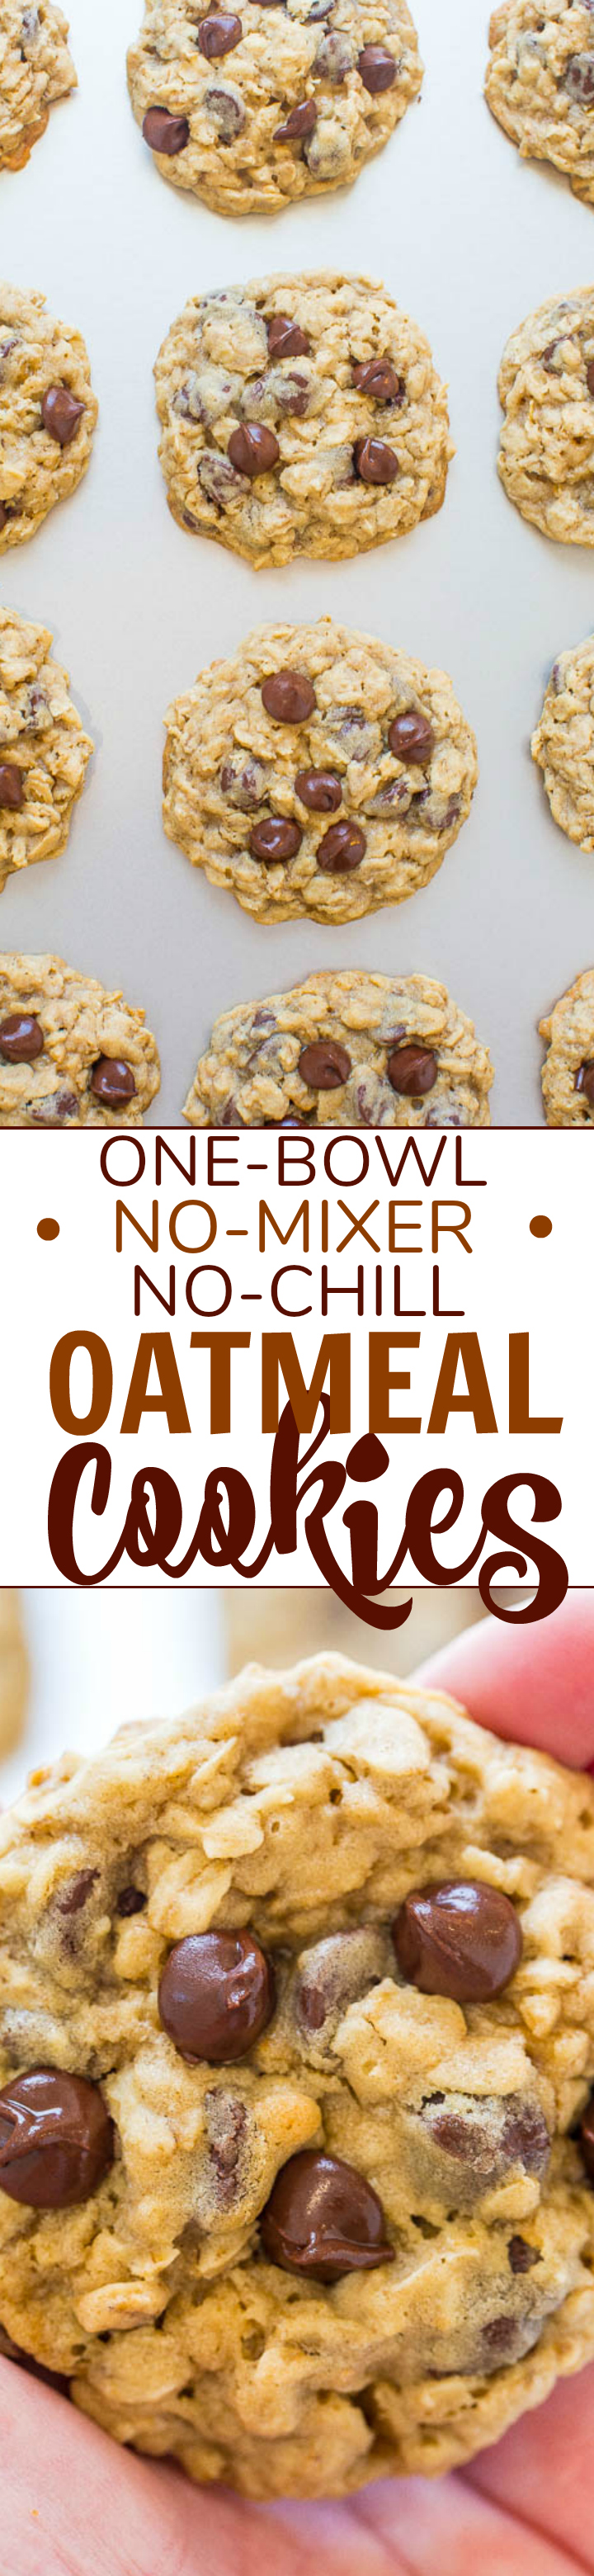 One-Bowl, No-Mixer, No-Chill Oatmeal Cookies - Averie Cooks